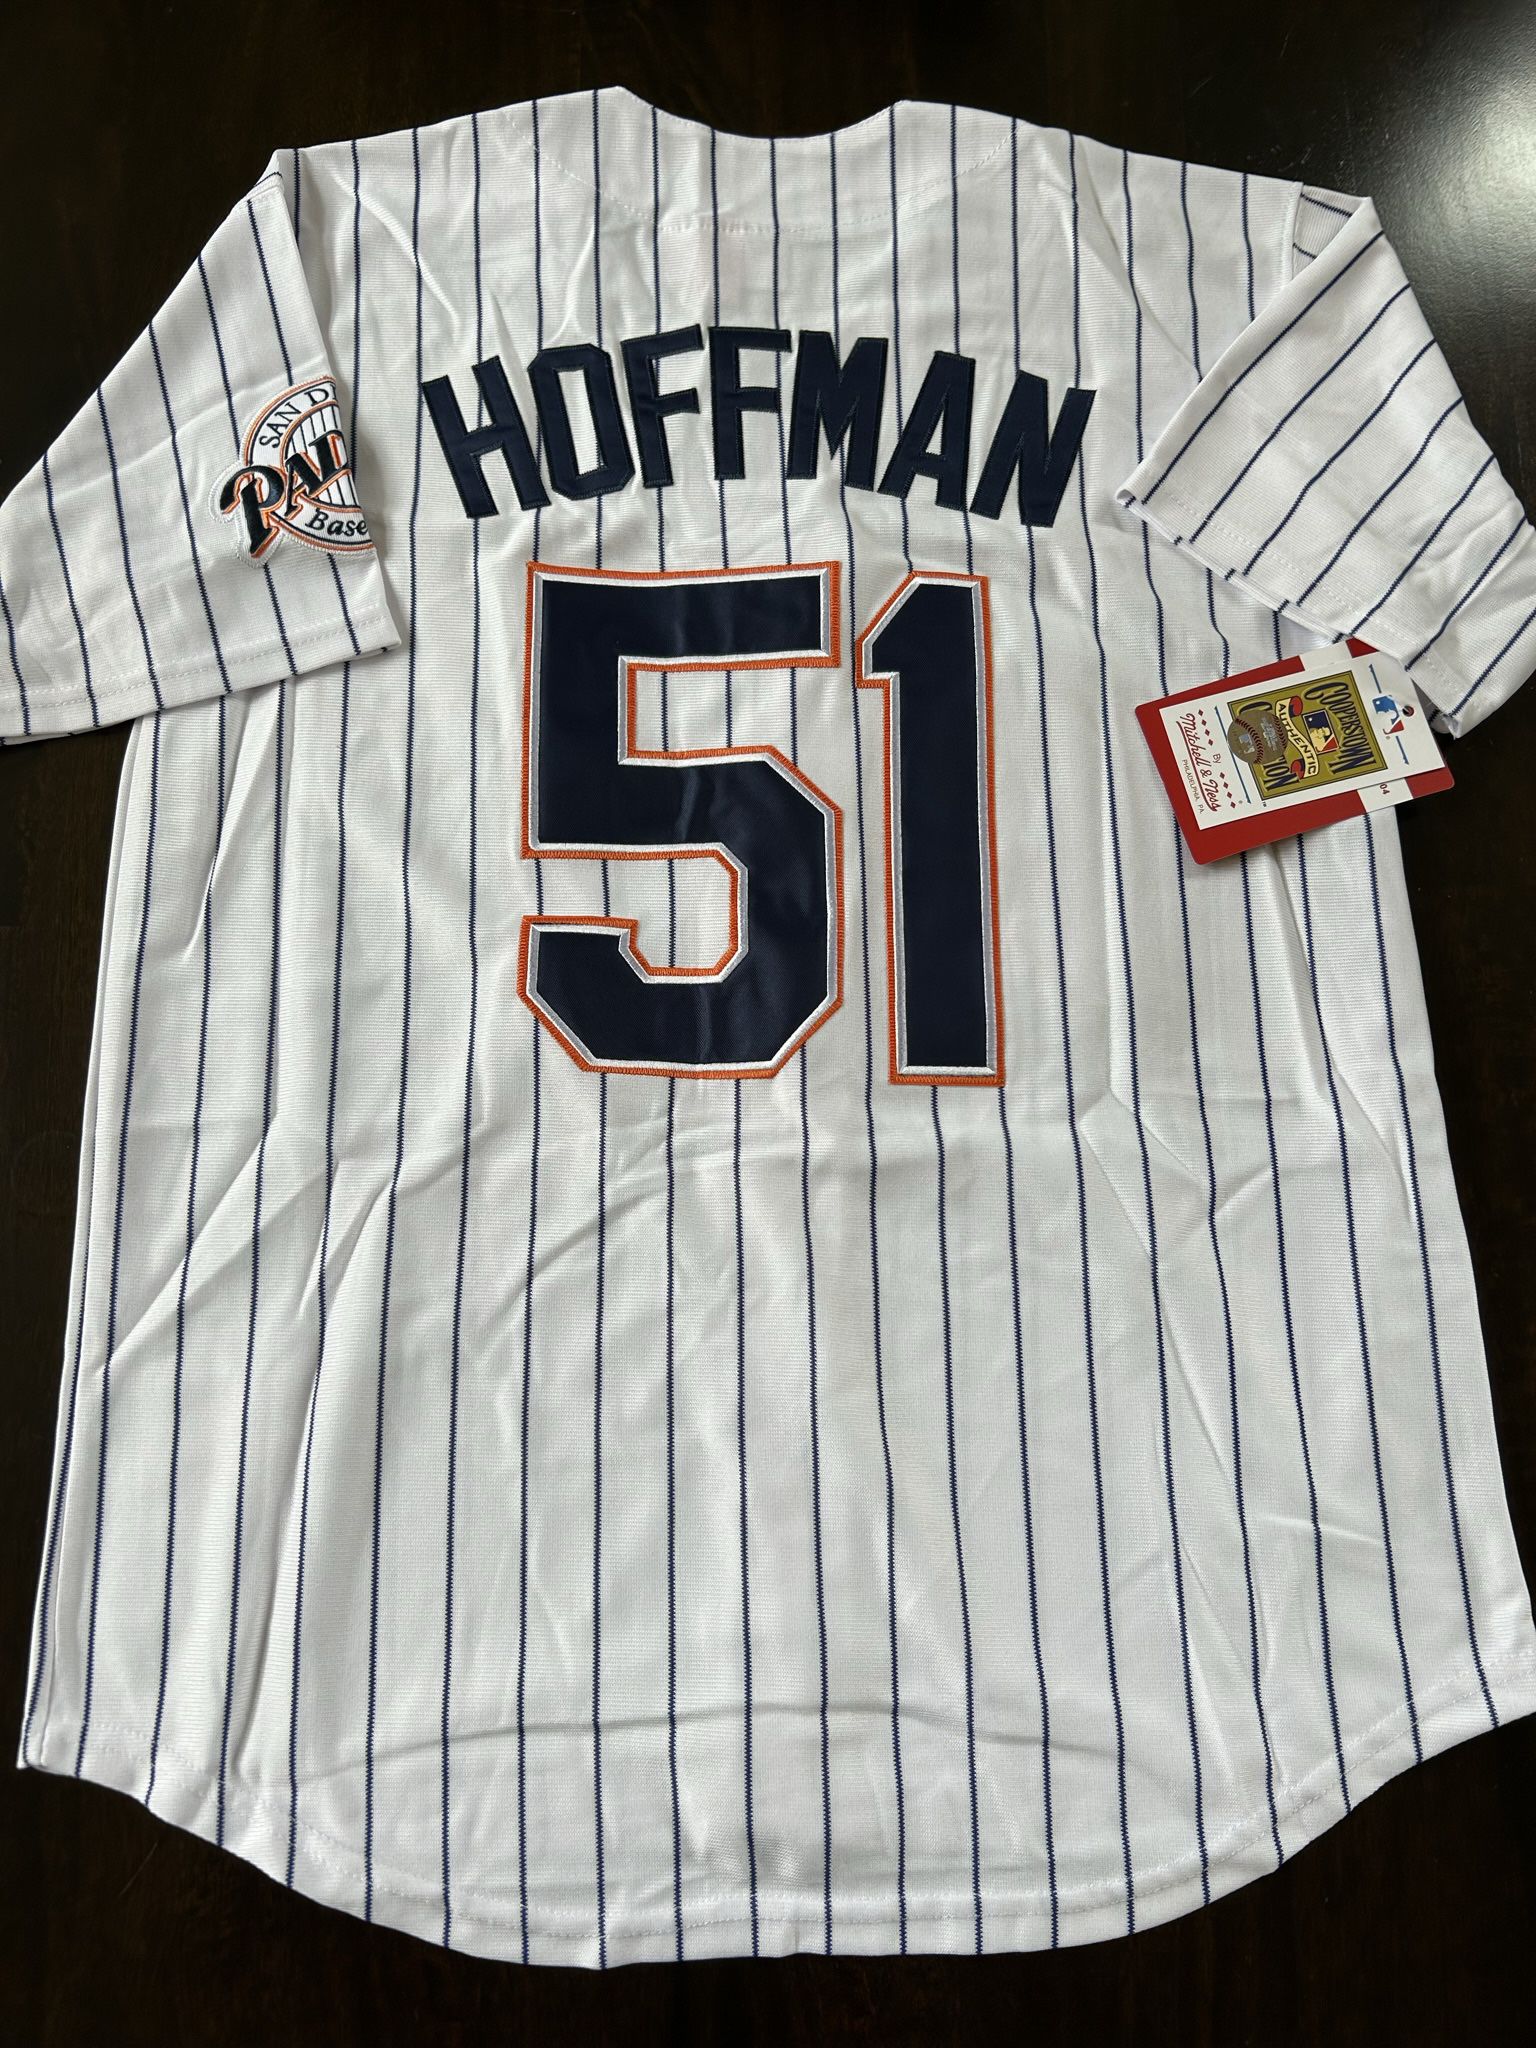 White Retro San Diego Padres Jersey Hoffman for Sale in Chula